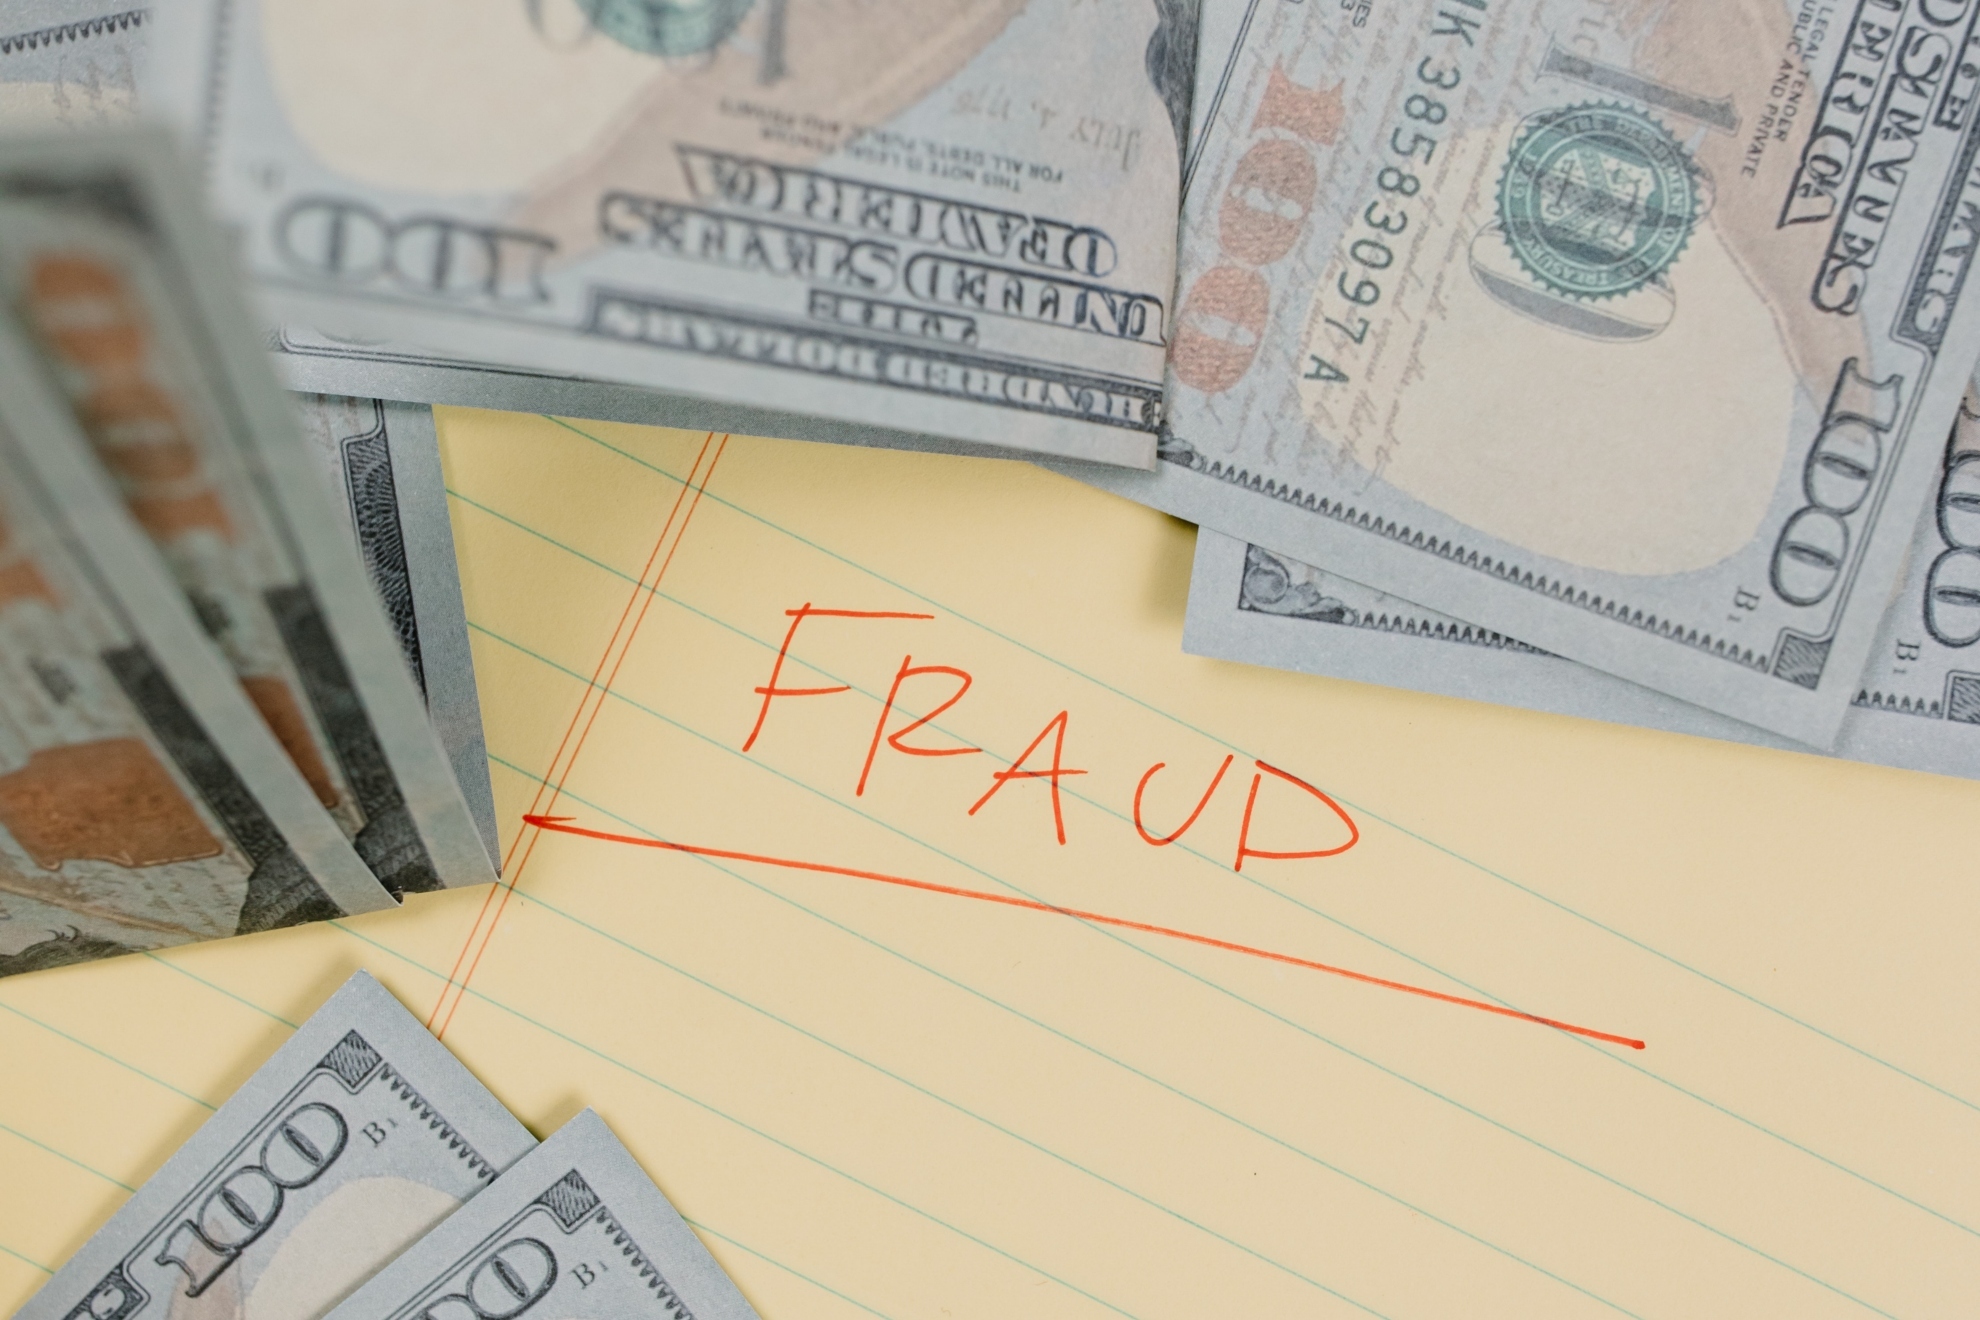 What is identity theft during tax season and how to protect myself from it?